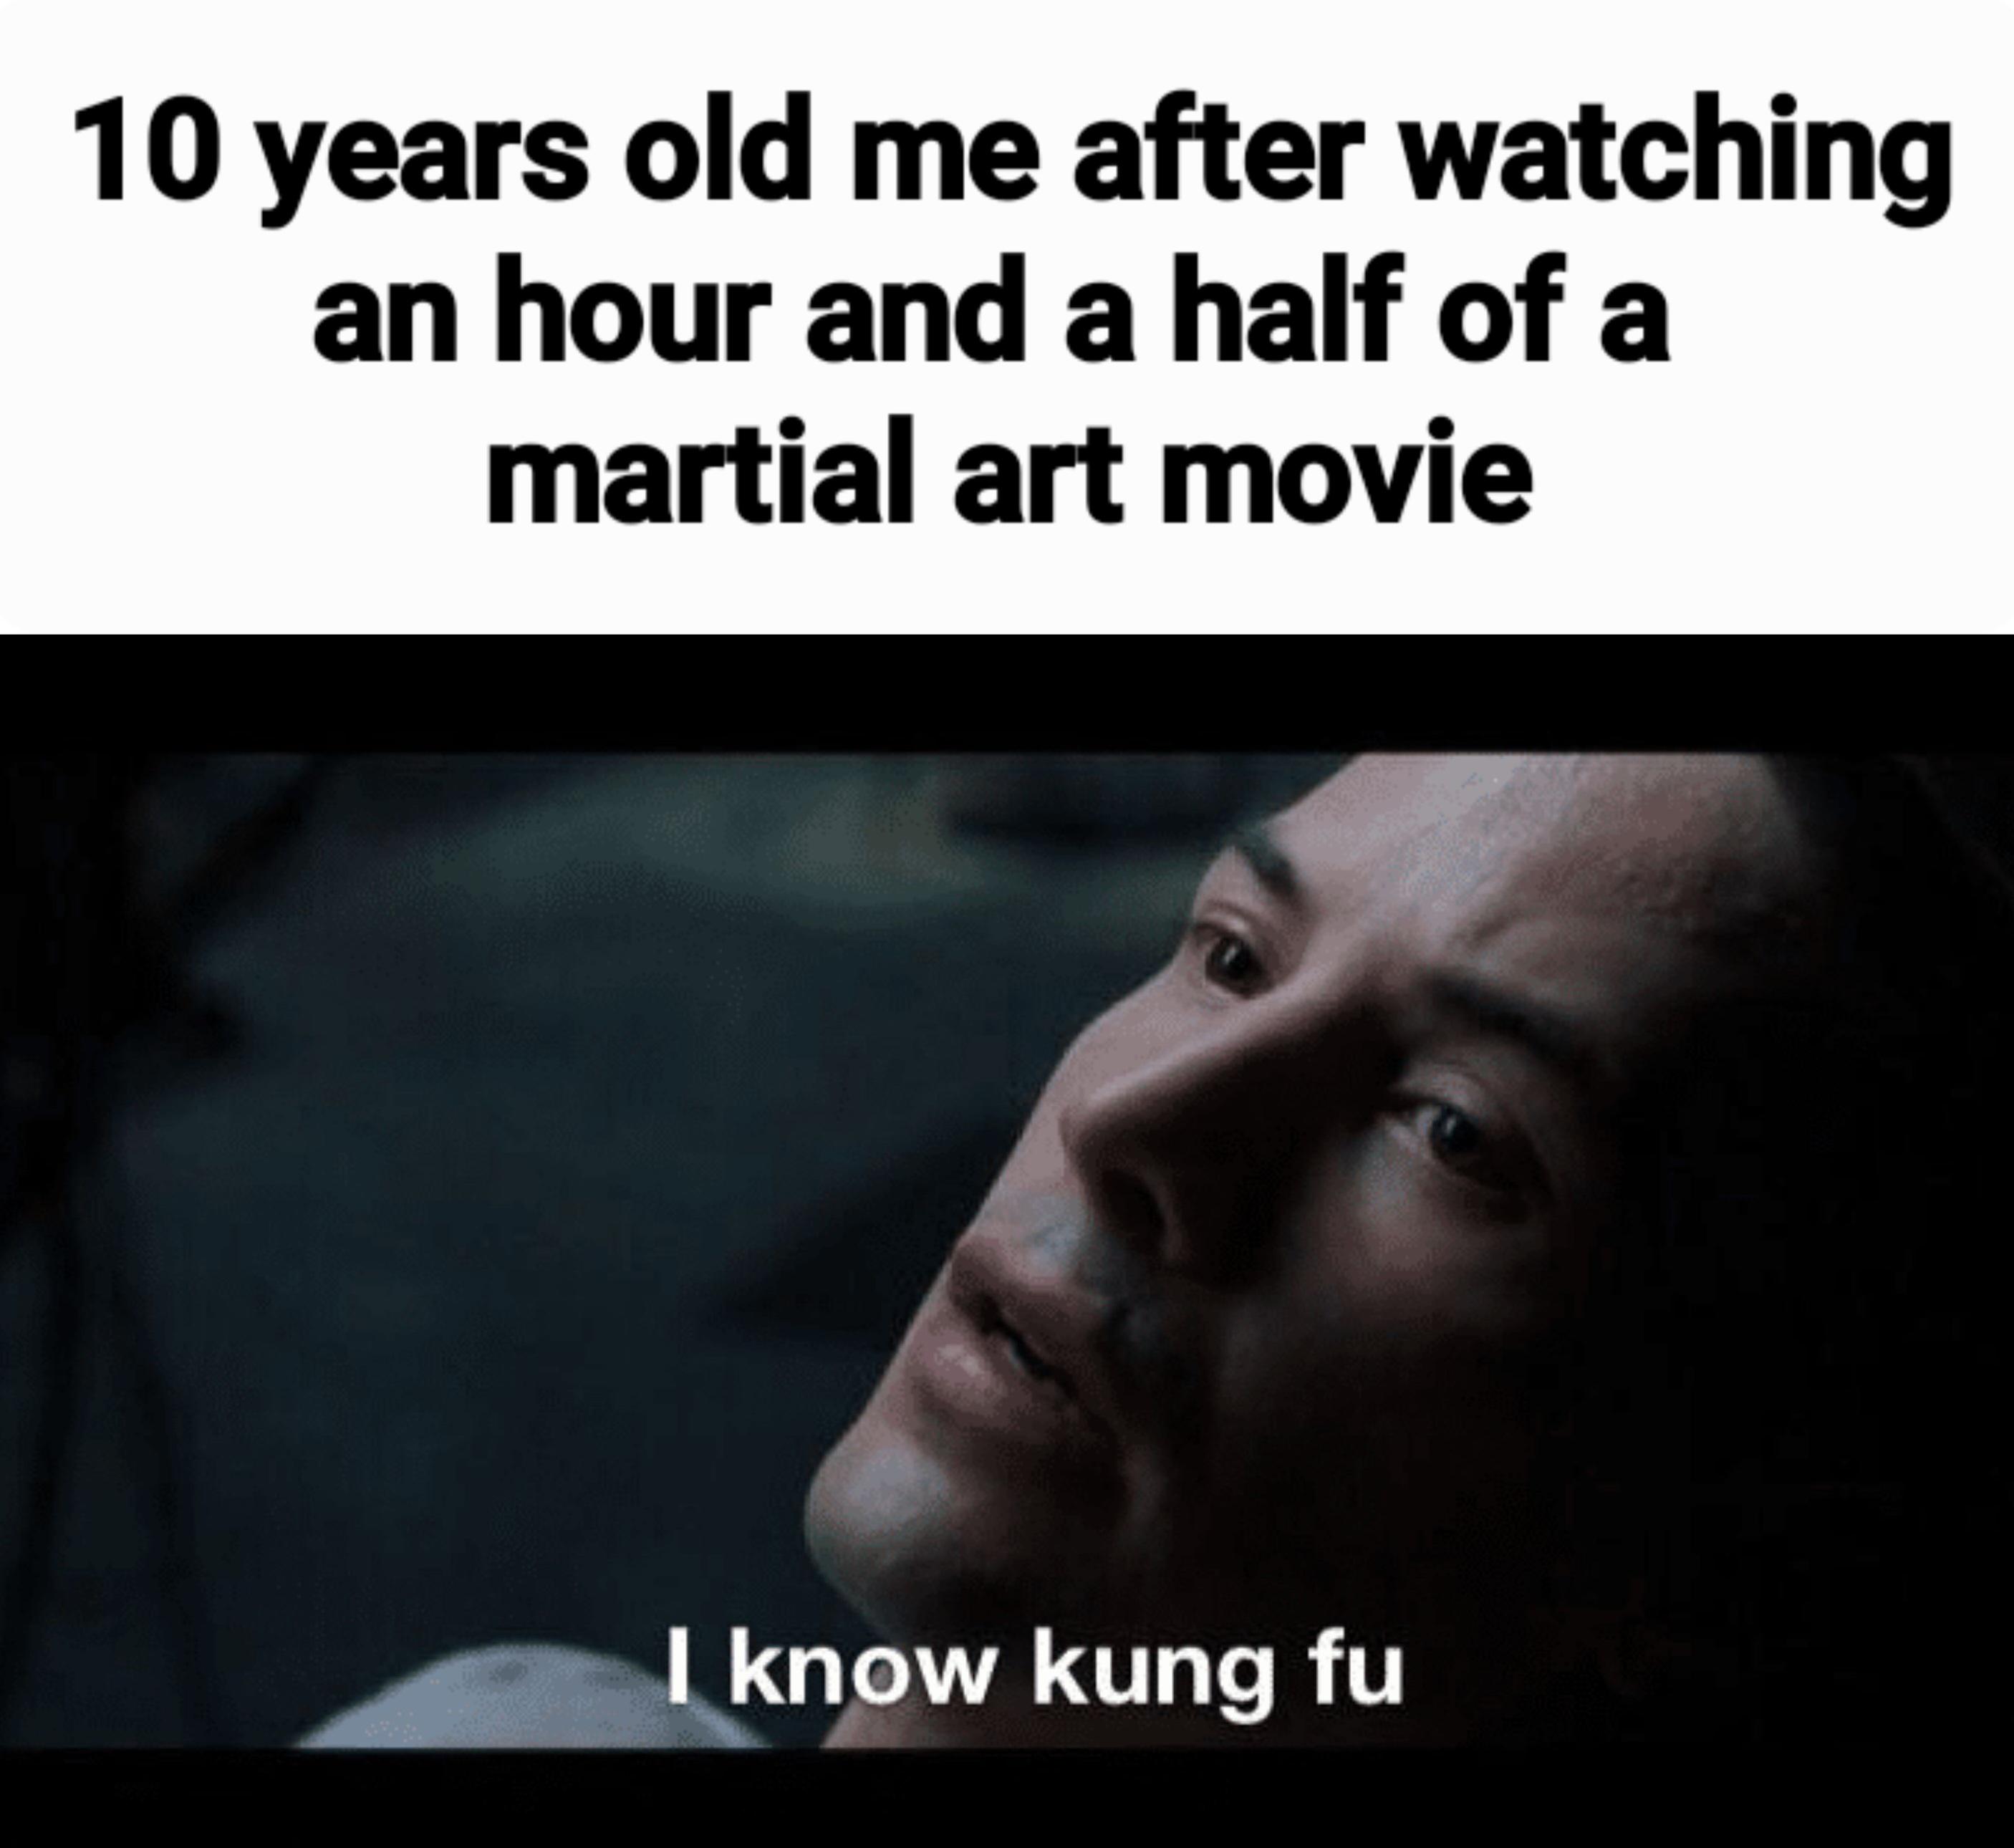 dank memes -  photo caption - 10 years old me after watching an hour and a half of a martial art movie 4 I know kung fu